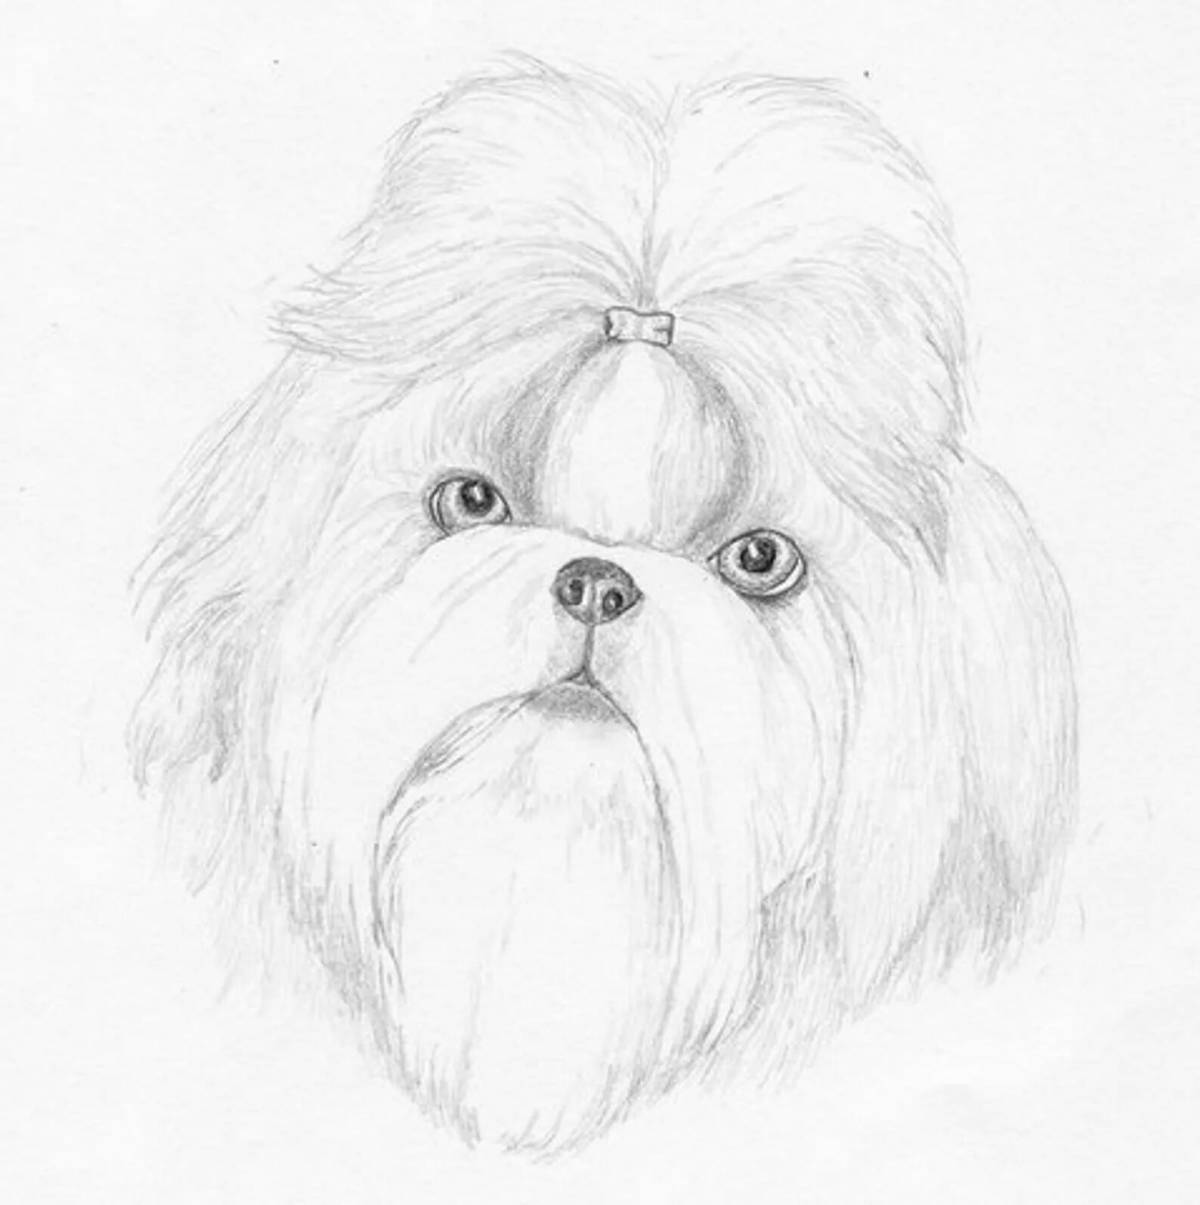 Colouring shih tzu with fluffy coat